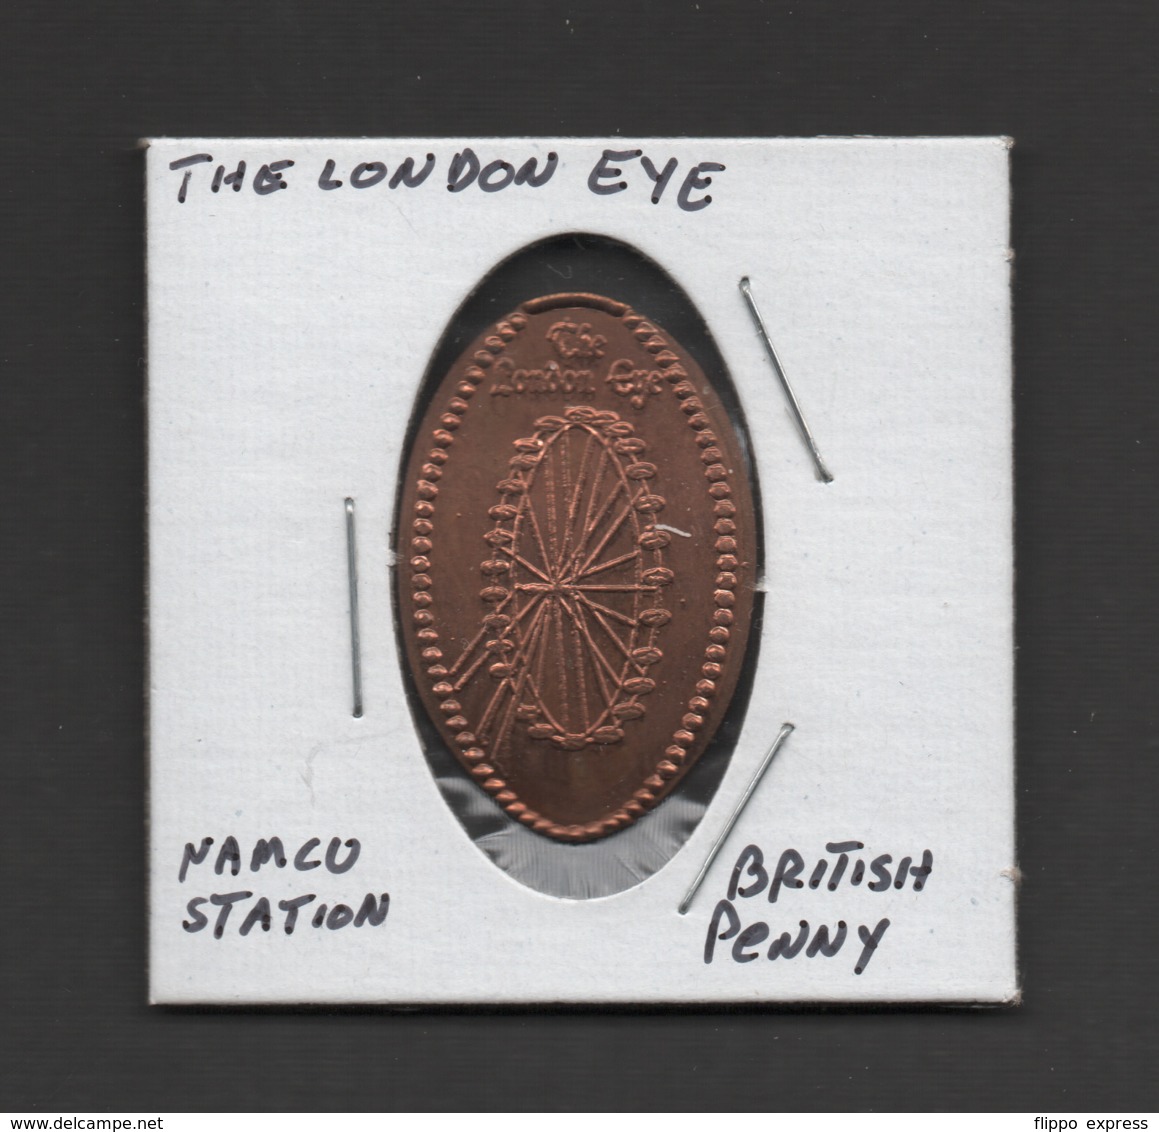 Pressed Penny, Elongated Coin, The London Eye, England - Pièces écrasées (Elongated Coins)